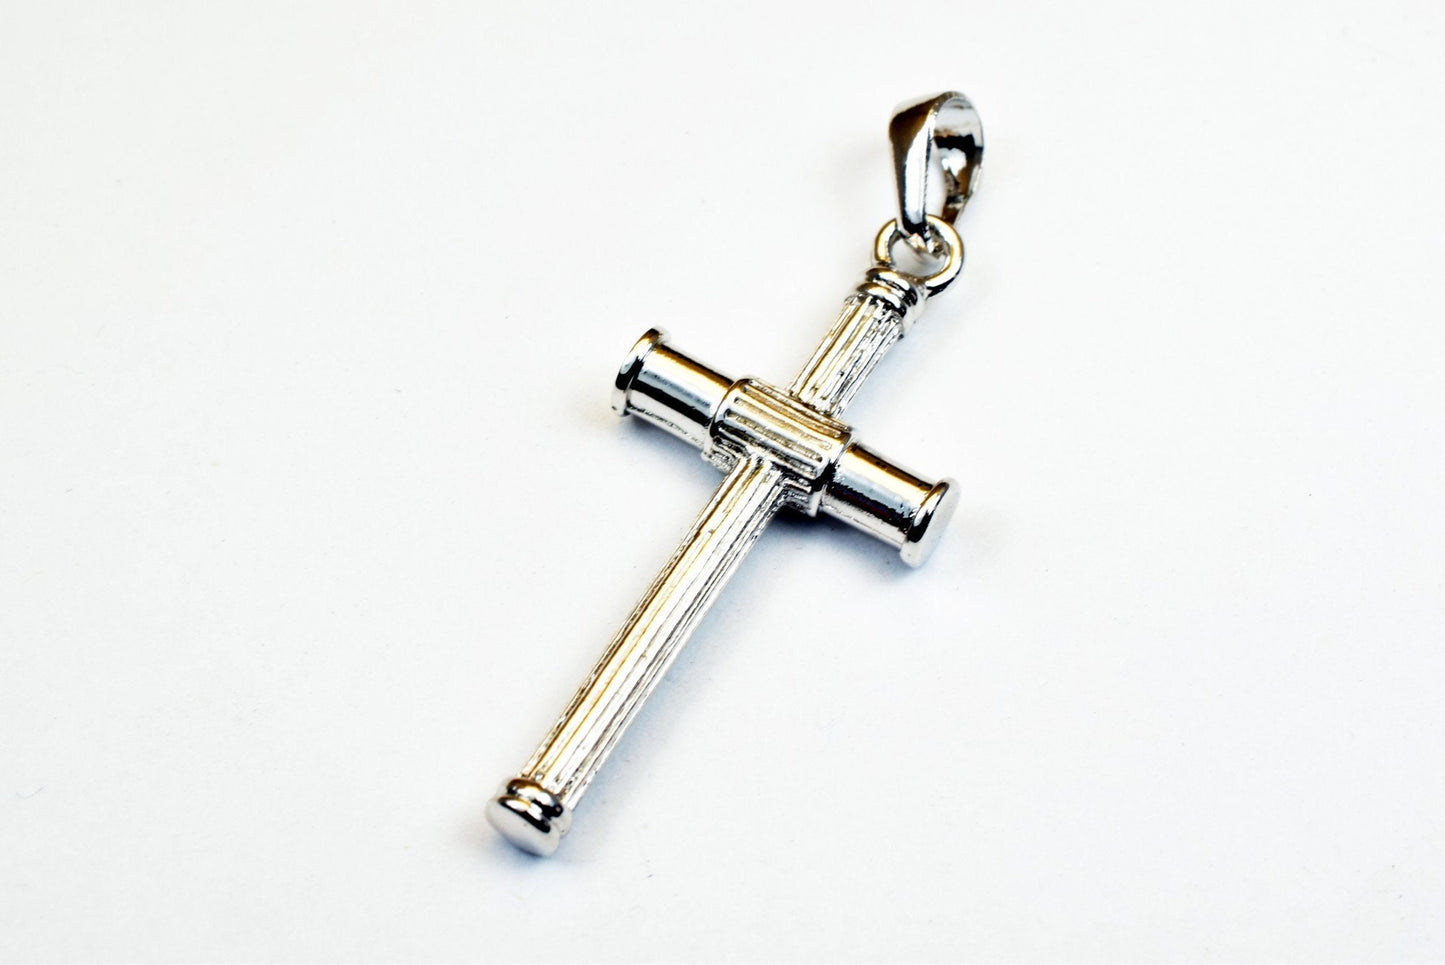 White as as gold filled* tarnish resistant cross pendant rhodium charm size 40x18mm thickness 5mm findings for jewelry making